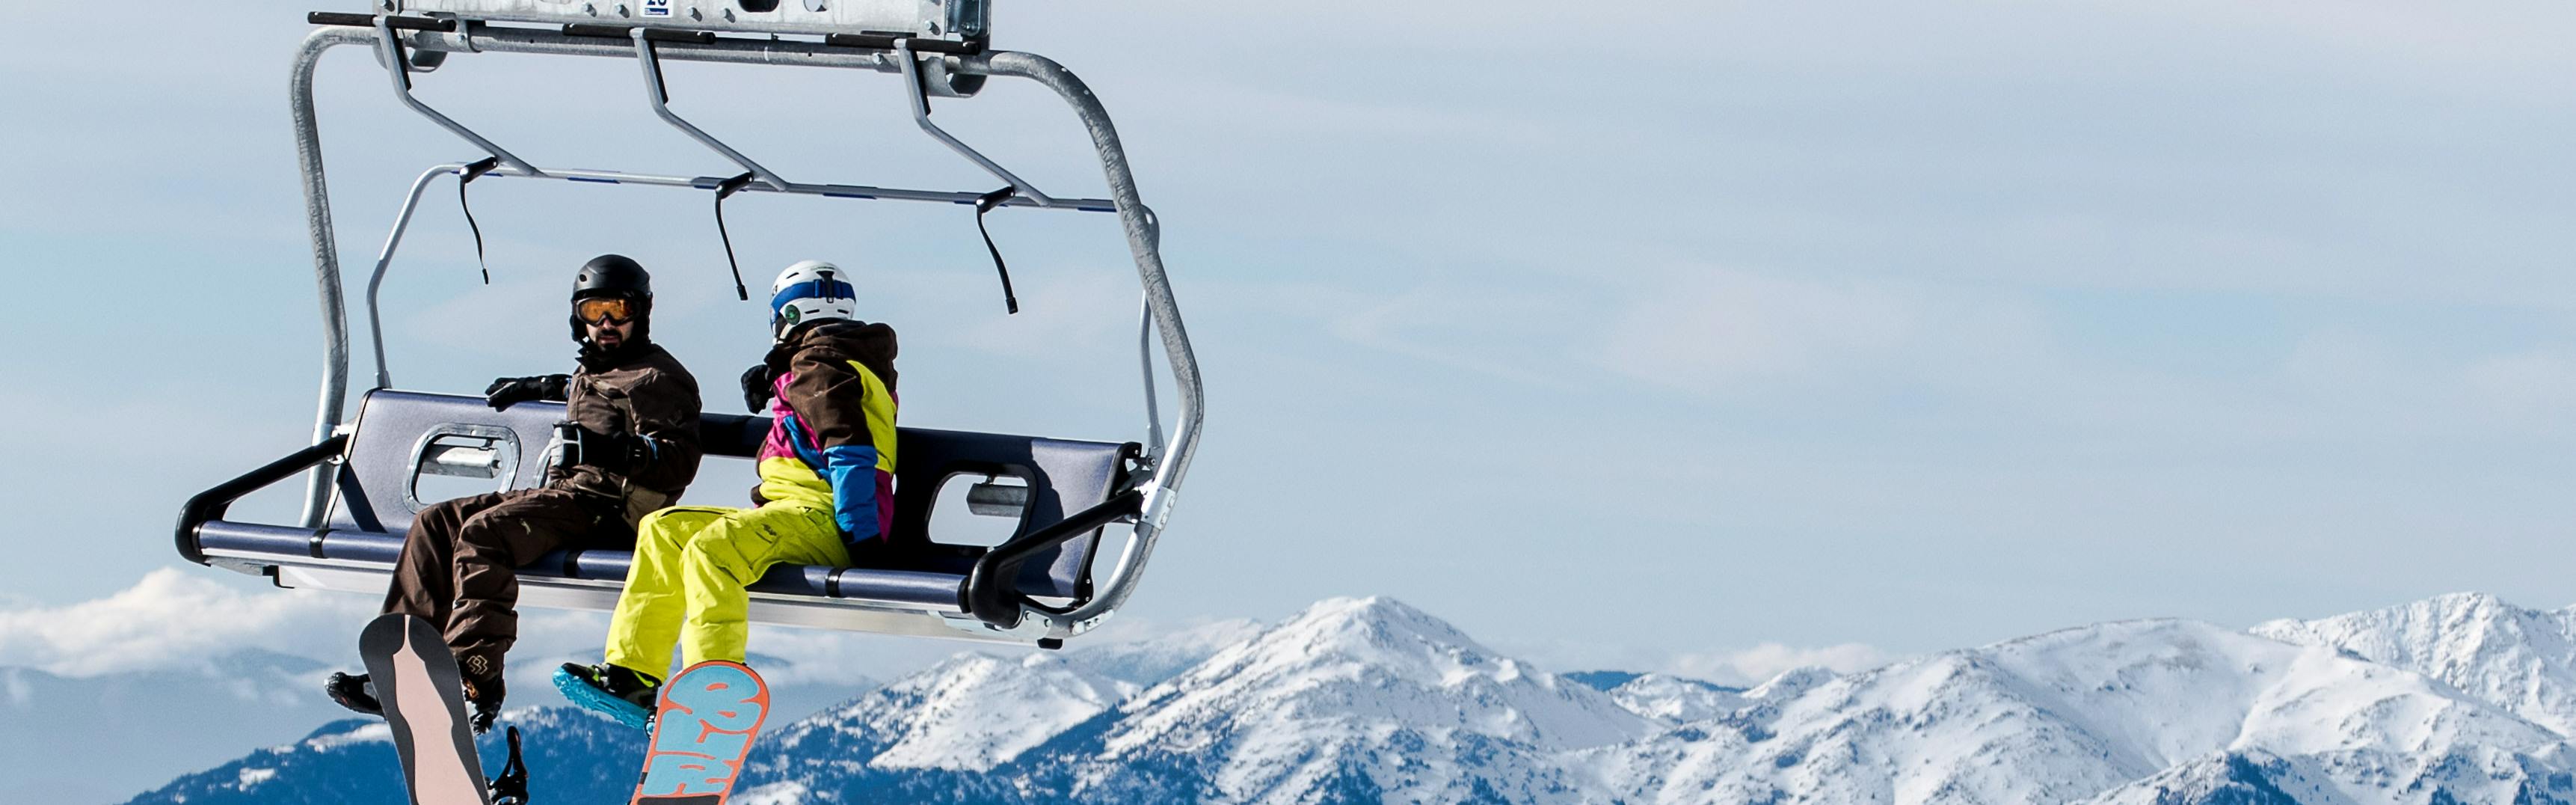 Two snowboarders sitting on a chairlift with mountains in the background.